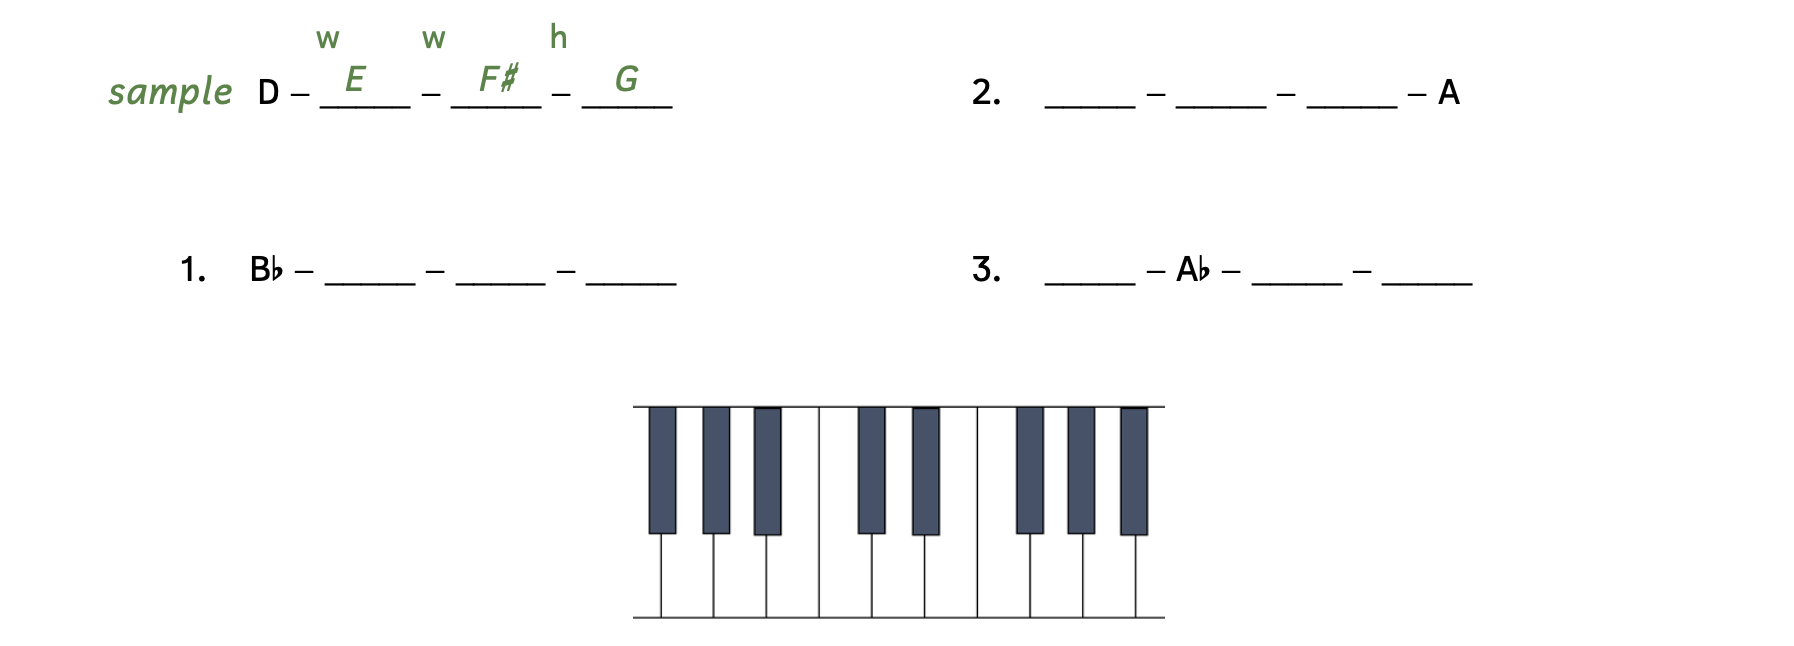 Fill in the major tetrachords with pitch names. The sample shows D, E, F-sharp, G. Number 1 begins on B-flat. Number 2 ends on A. The second pitch on number 3 is A-flat.